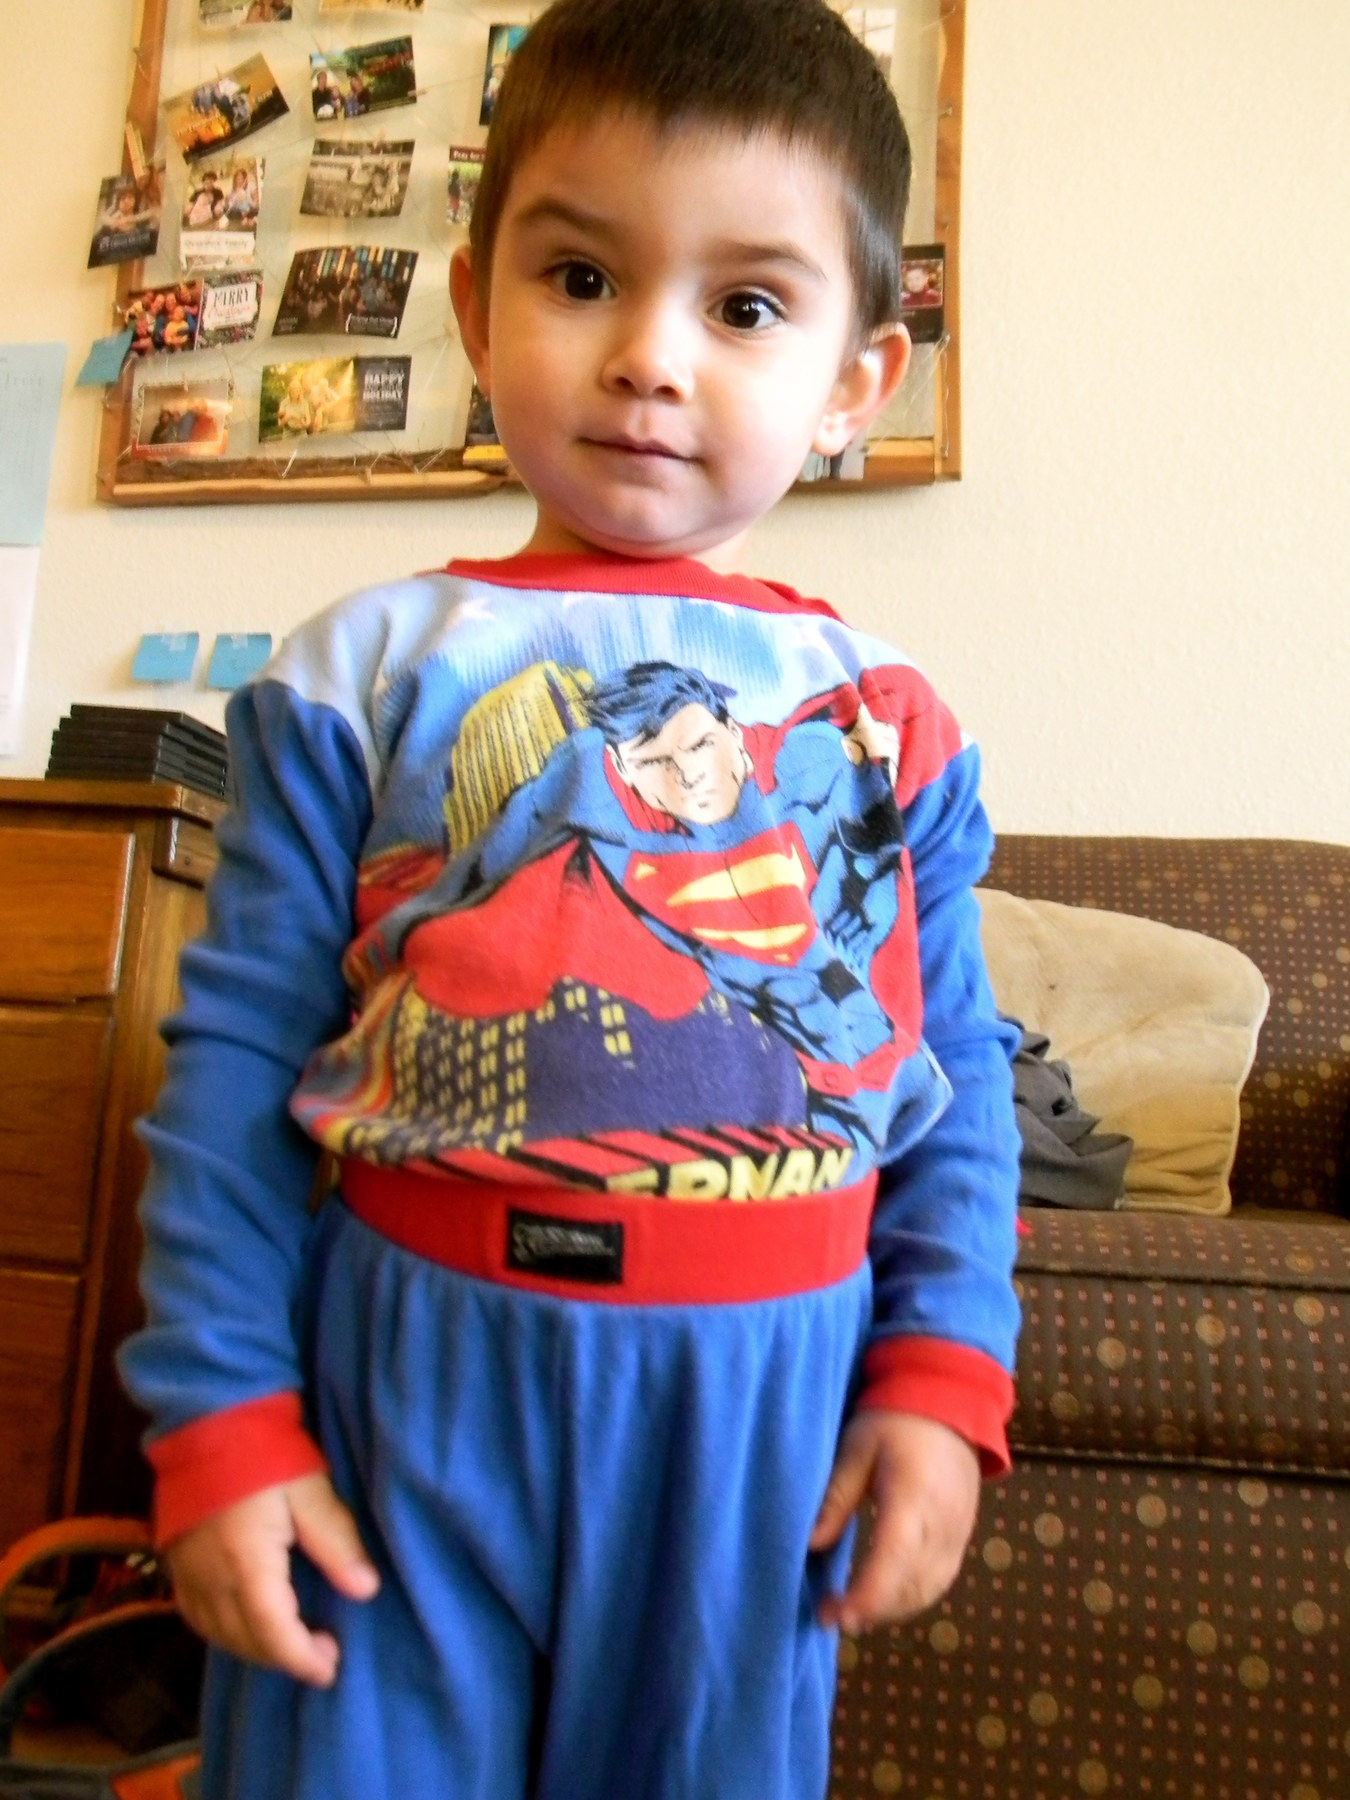 You find a superman outfit in the free clothes pile... 